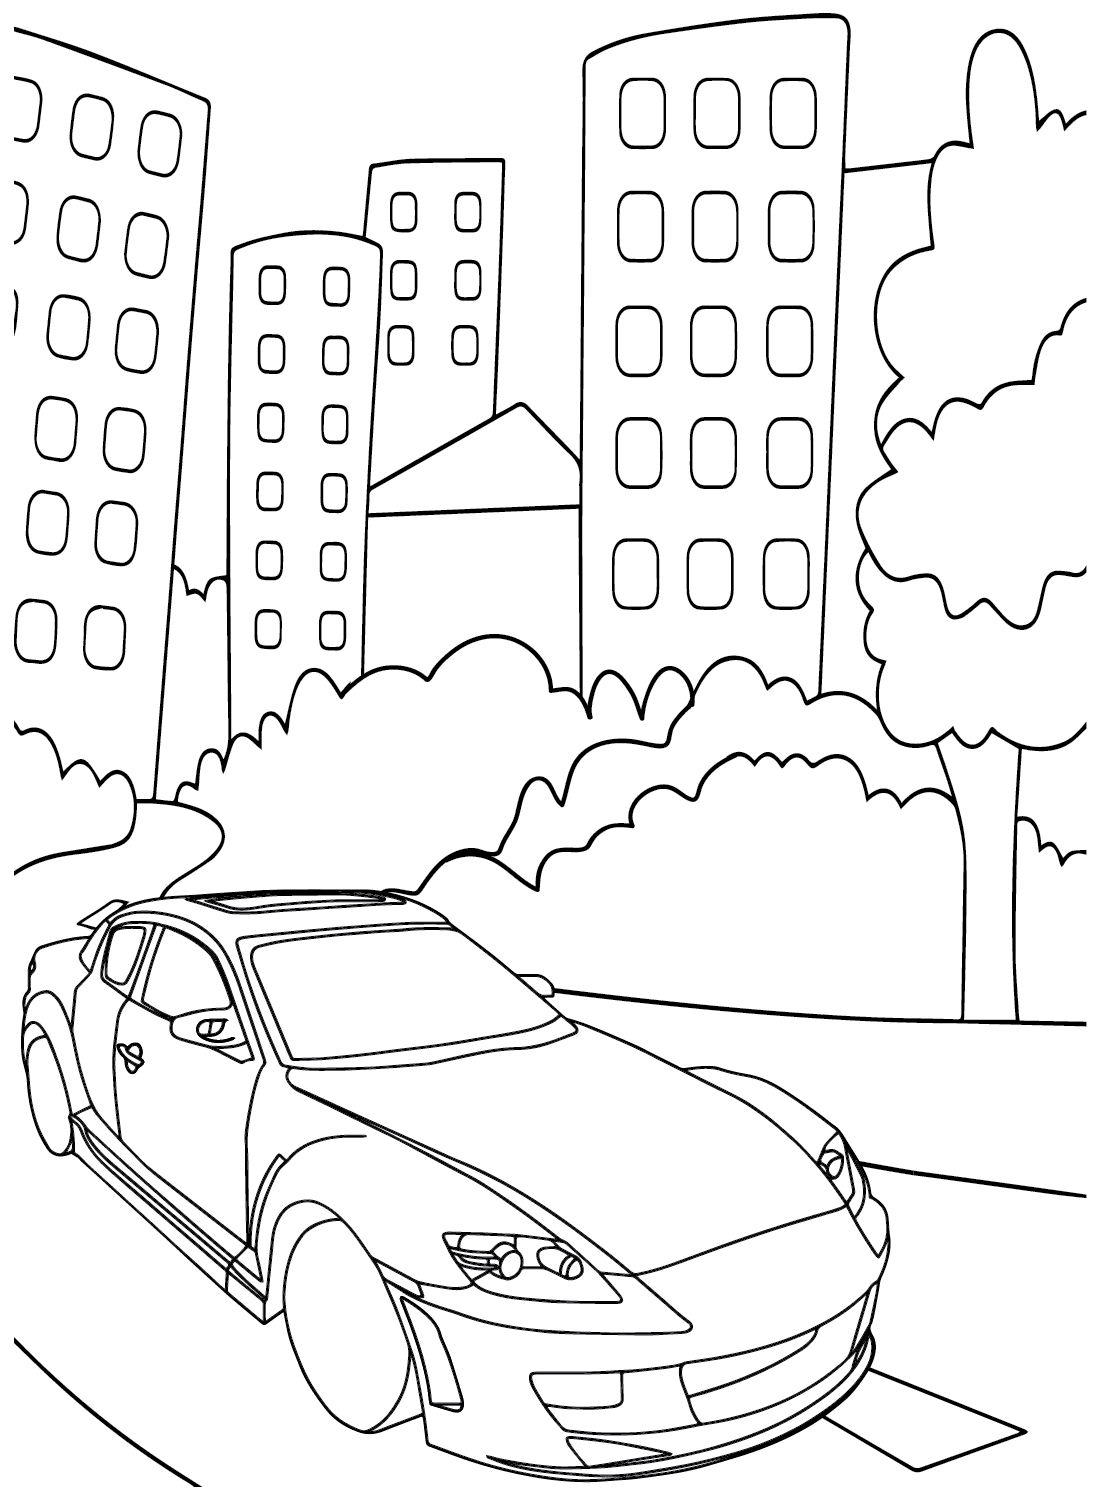 Mazda RX-8 Coloring Page from Mazda